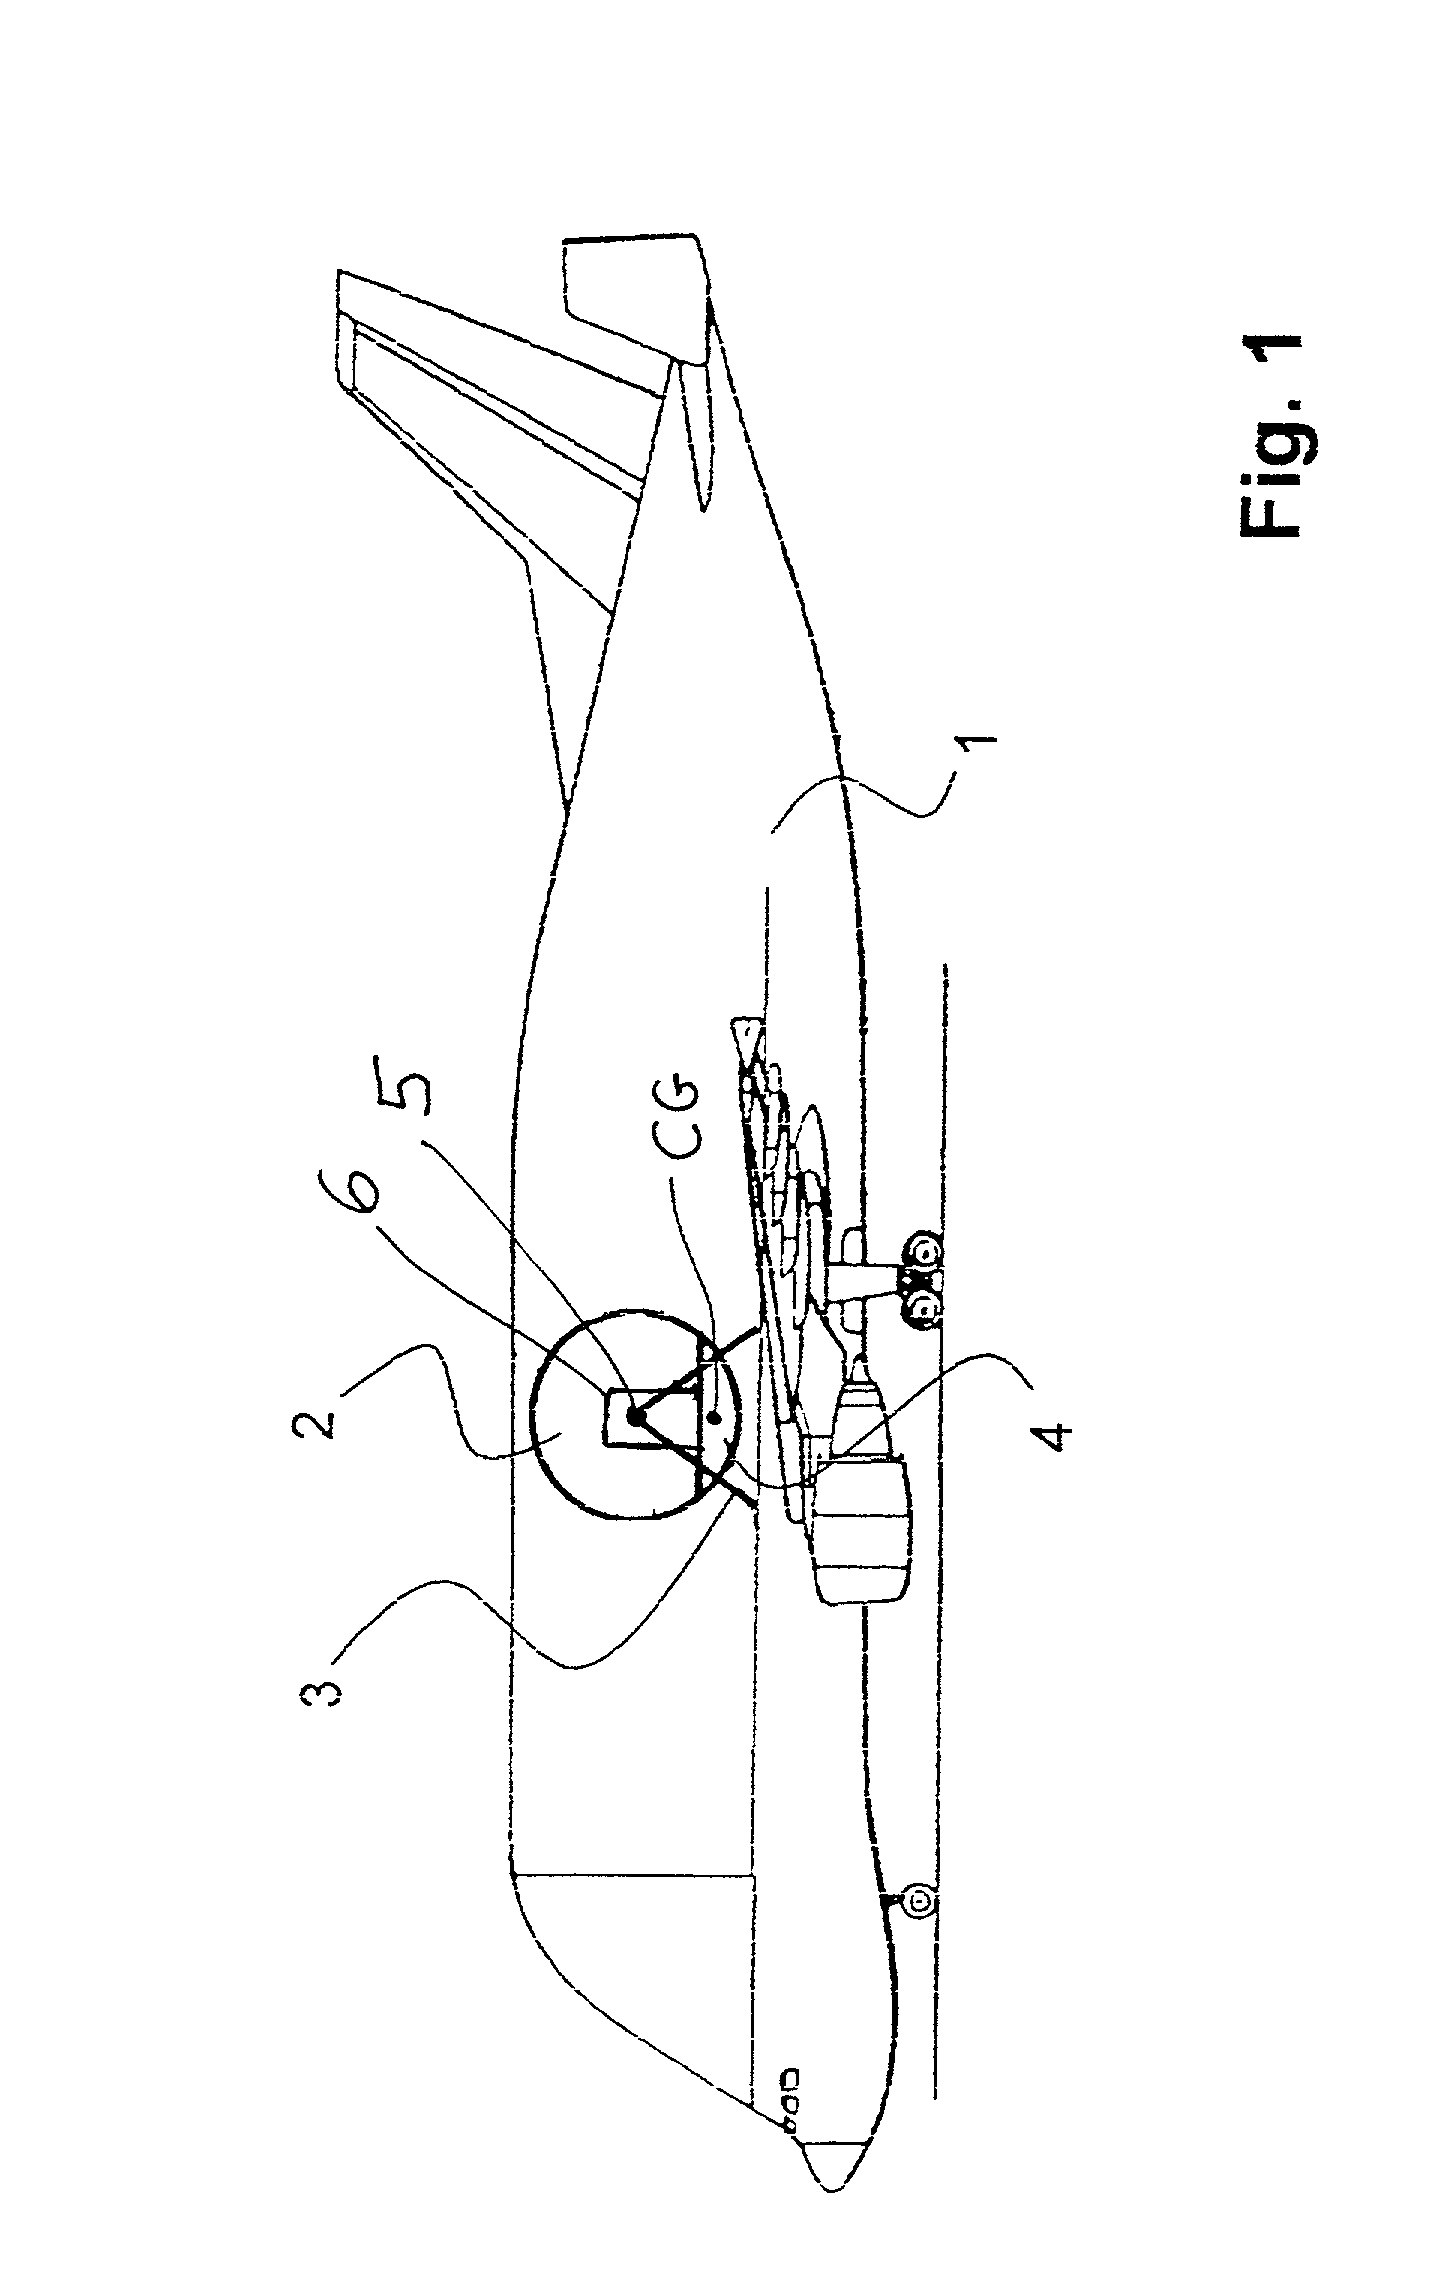 Method and apparatus for aircraft-based simulation of variable accelerations and reduced gravity conditions